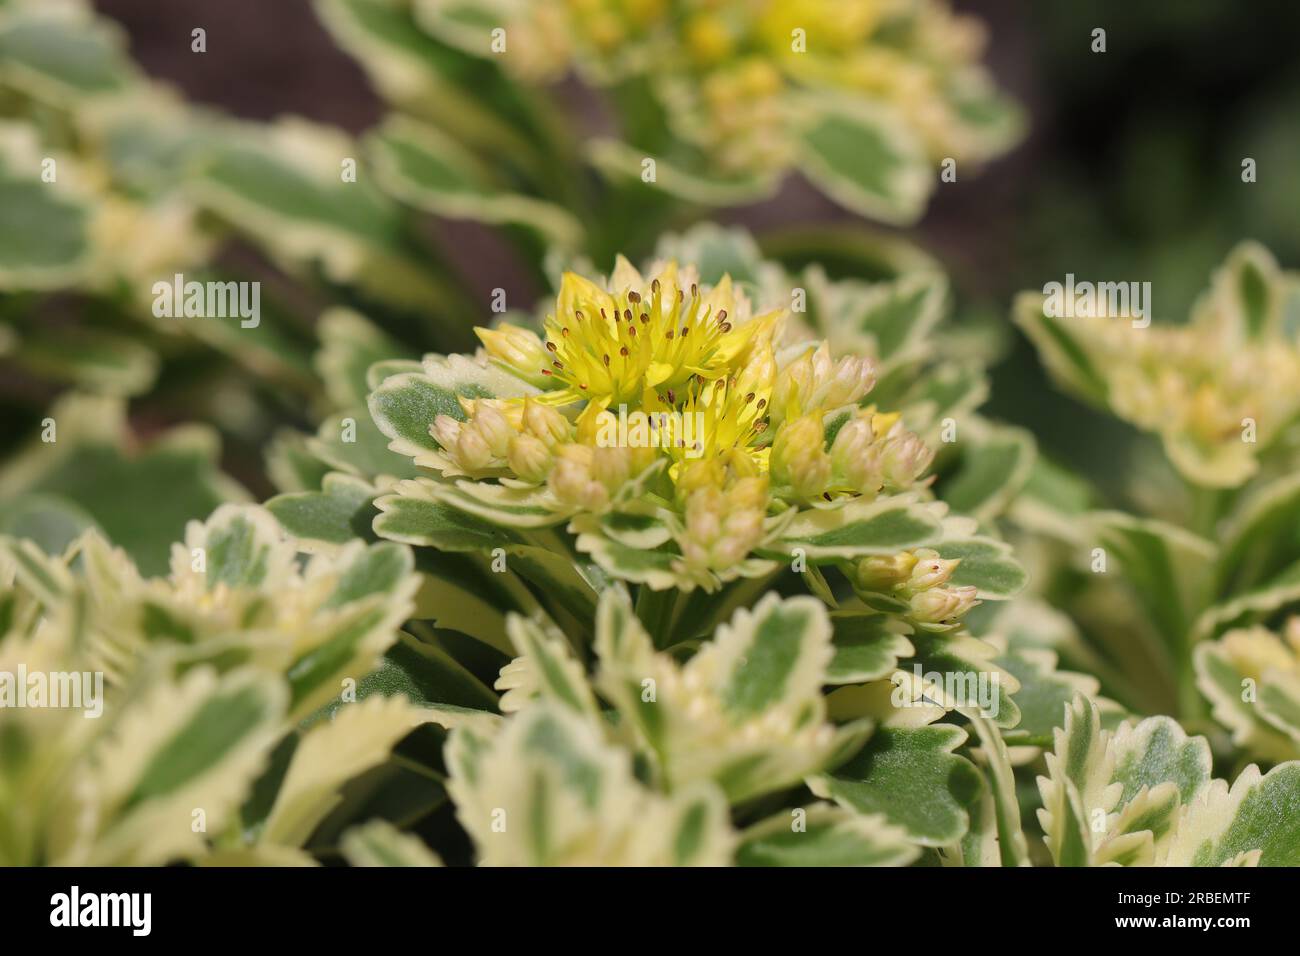 Close-up of a beautiful Phedimus aizoon plant with a dense yellow inflorescence in a flower bed, side view Stock Photo